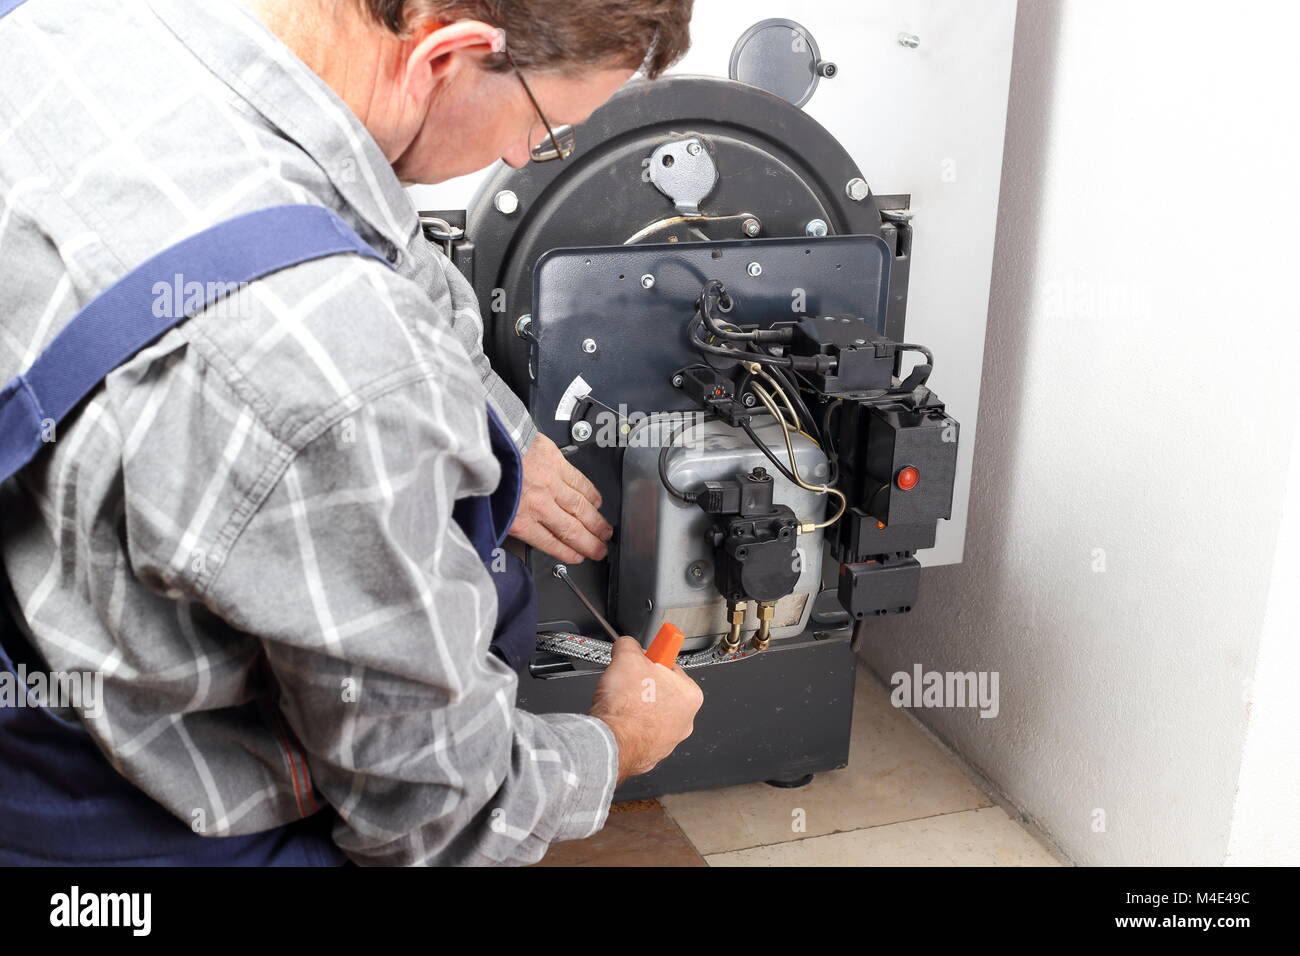 worker is checking an oil burner Stock Photo